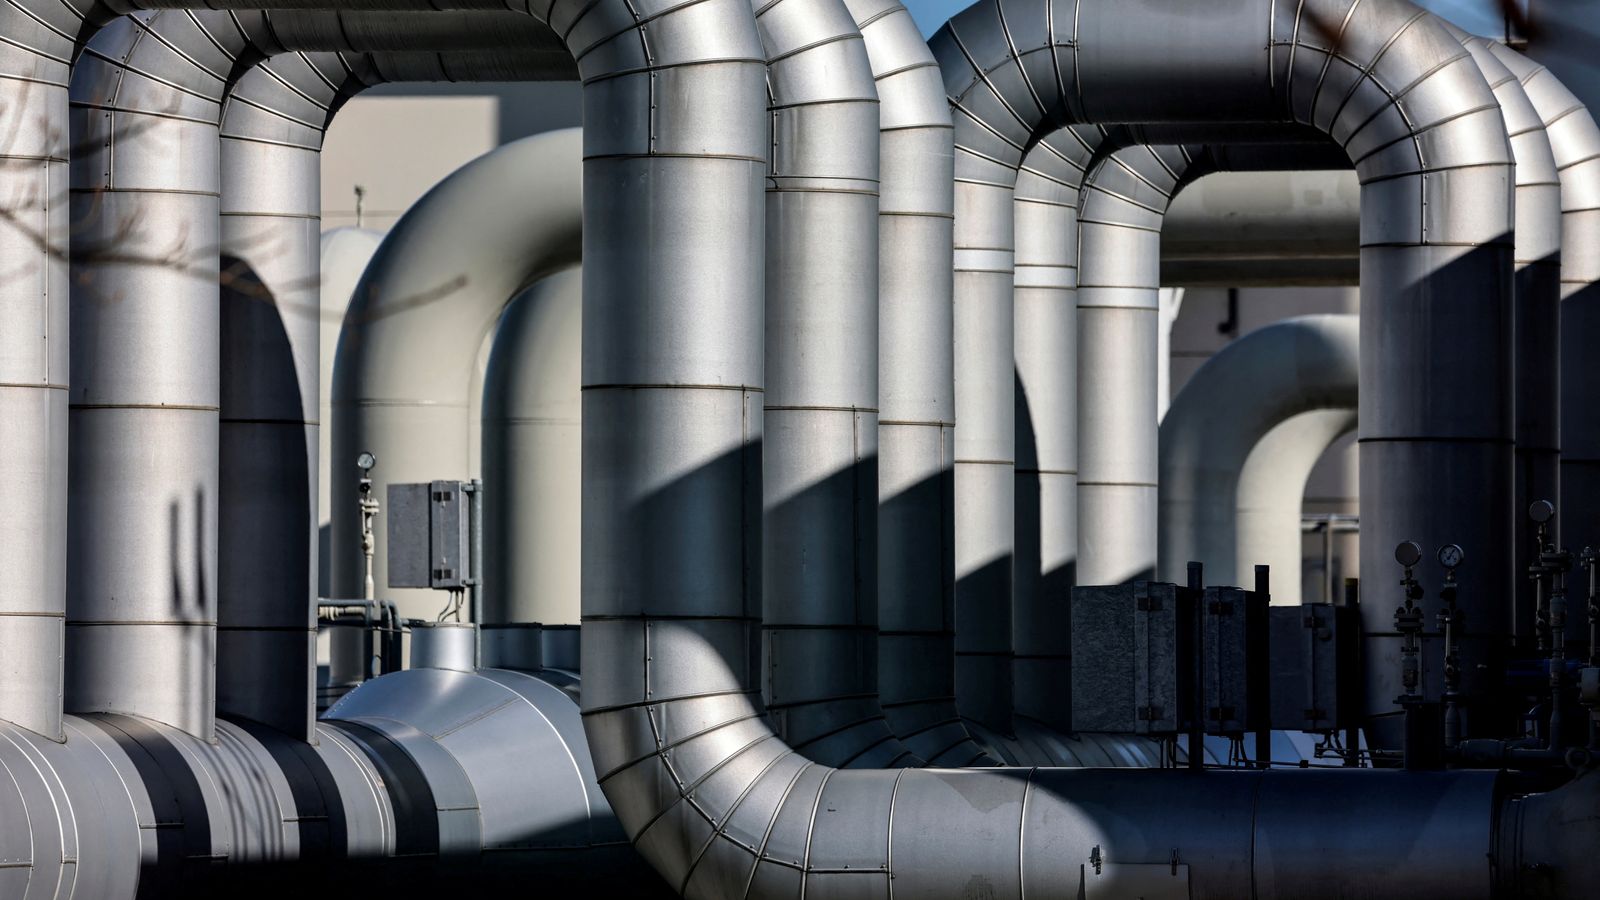 Germans urged to use less energy after Russia cuts gas supply and prices surge